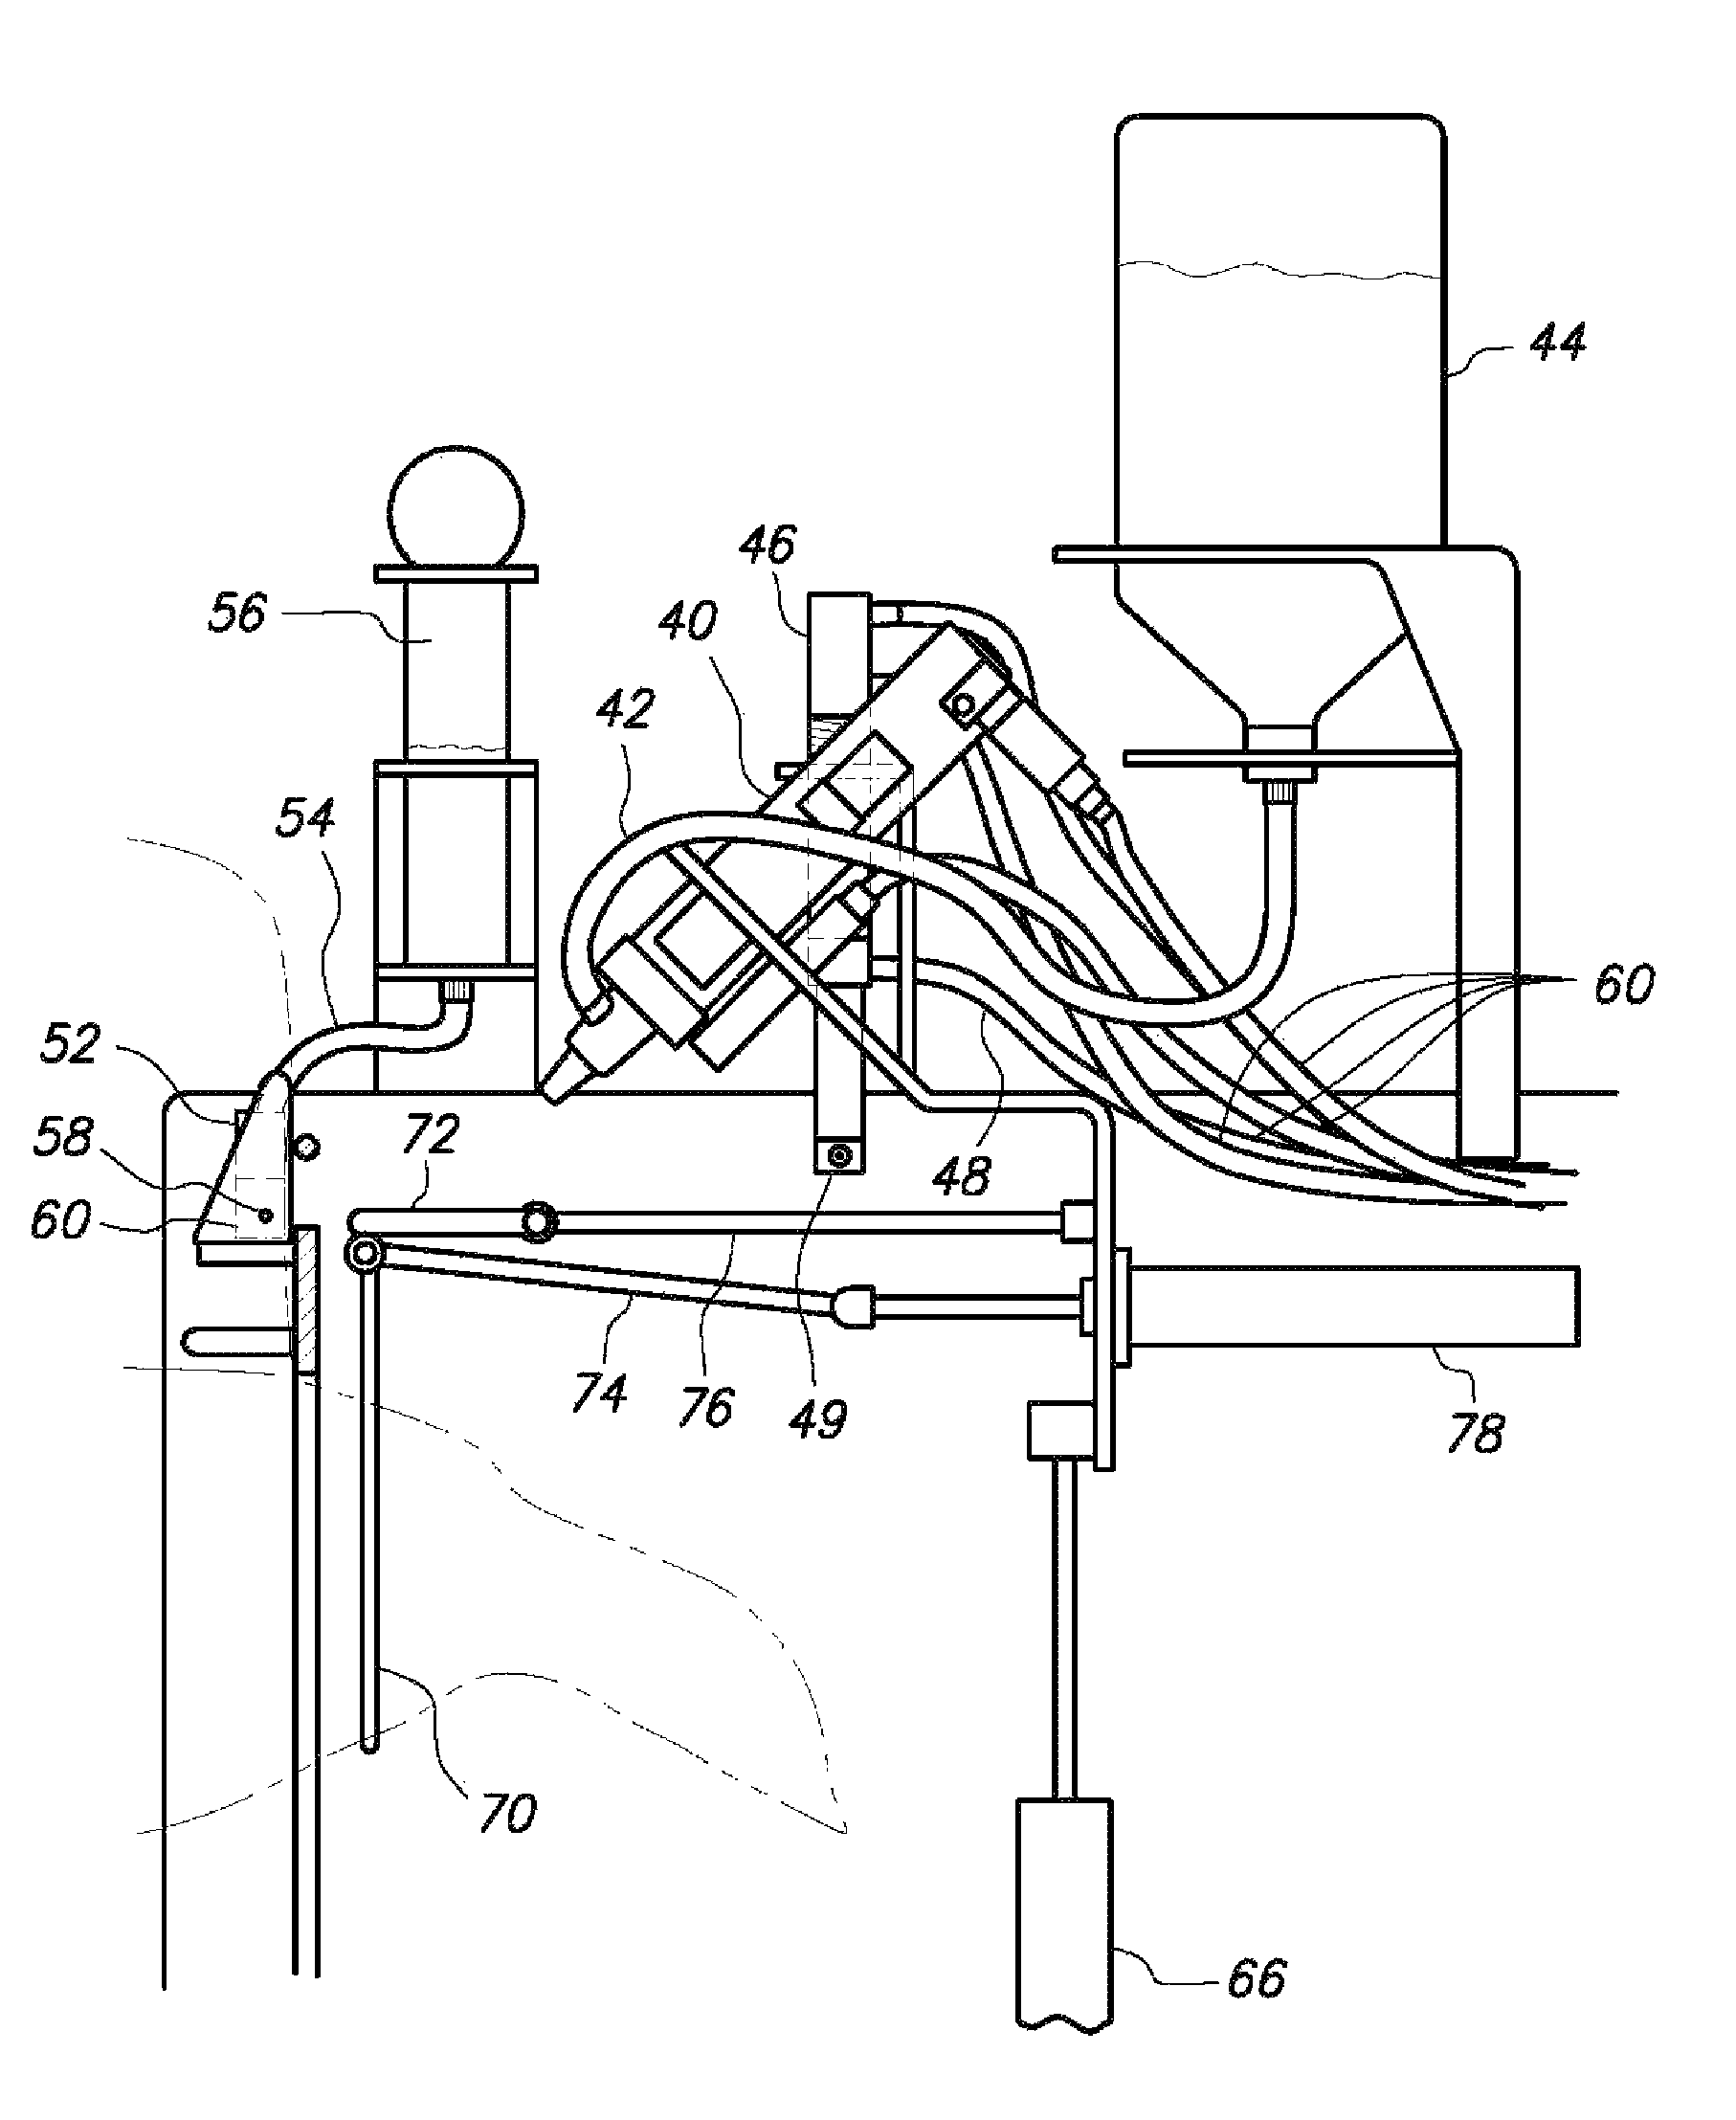 Poultry vaccination apparatus and method